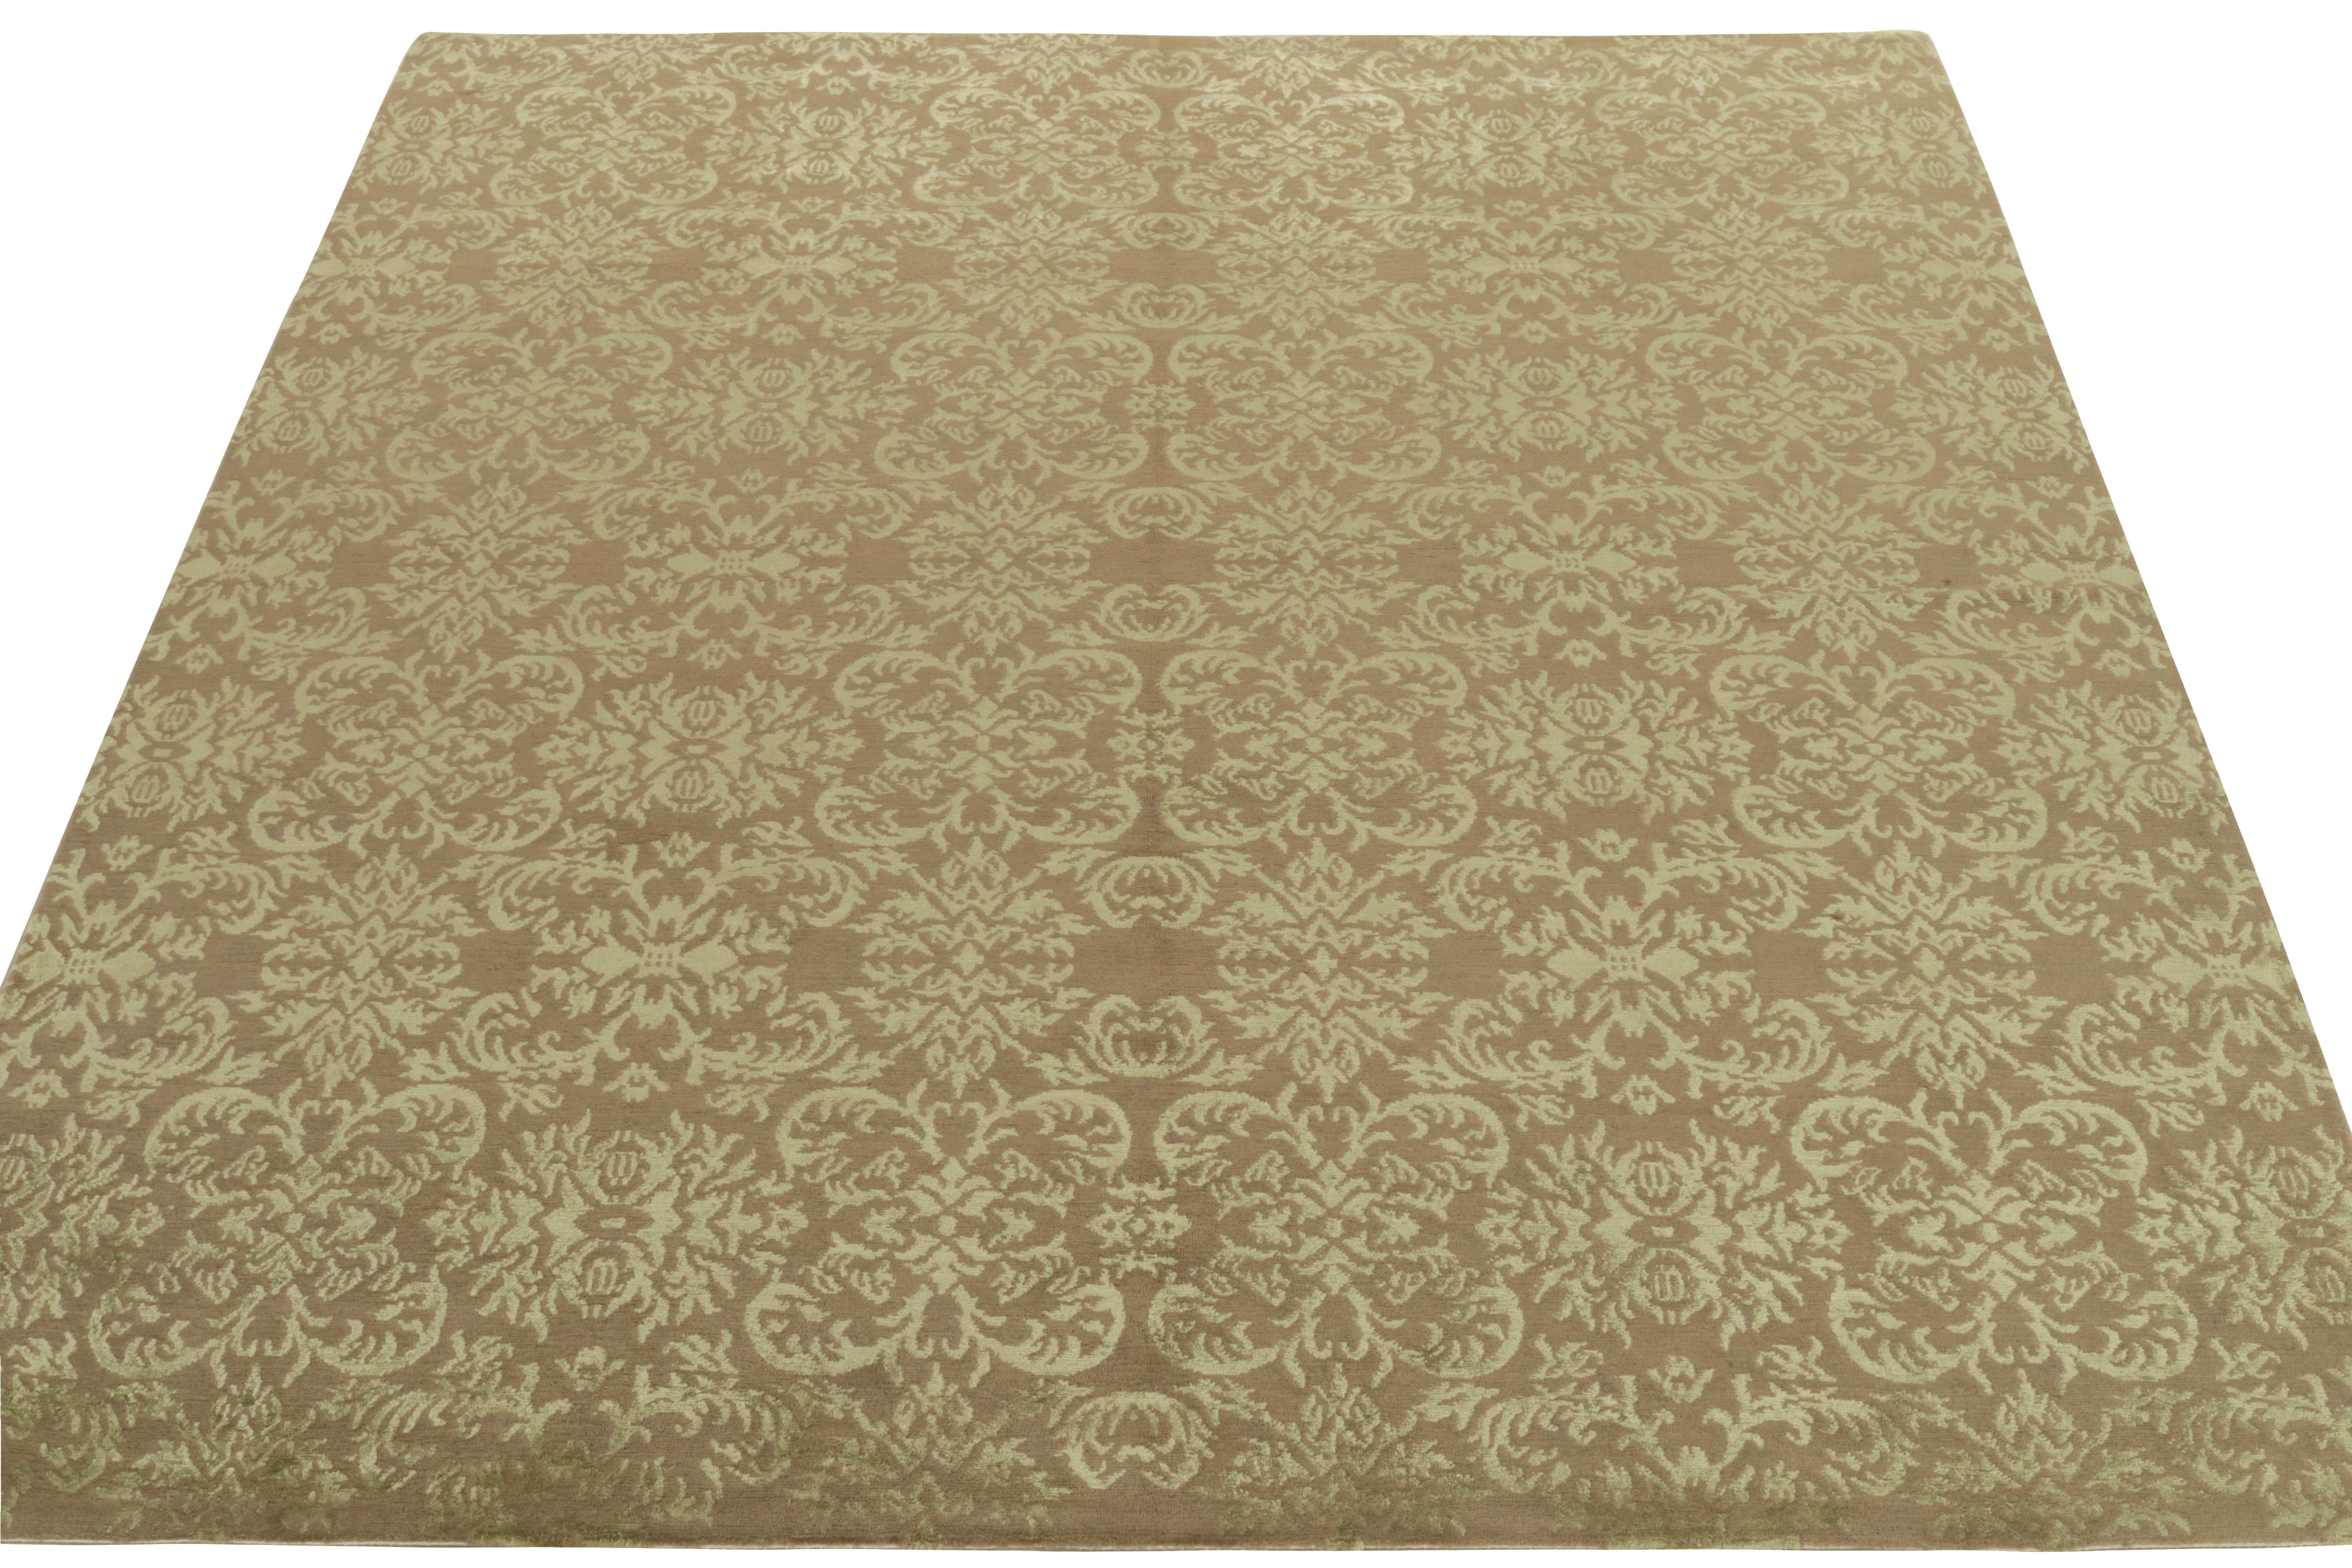 From Rug & Kilim’s European selections, an almost square piece reading classic floral variations in fine transitional style. The hand-knotted rug dons a lustrous appeal from the natural sheen of wool & silk blend further complementing subtle